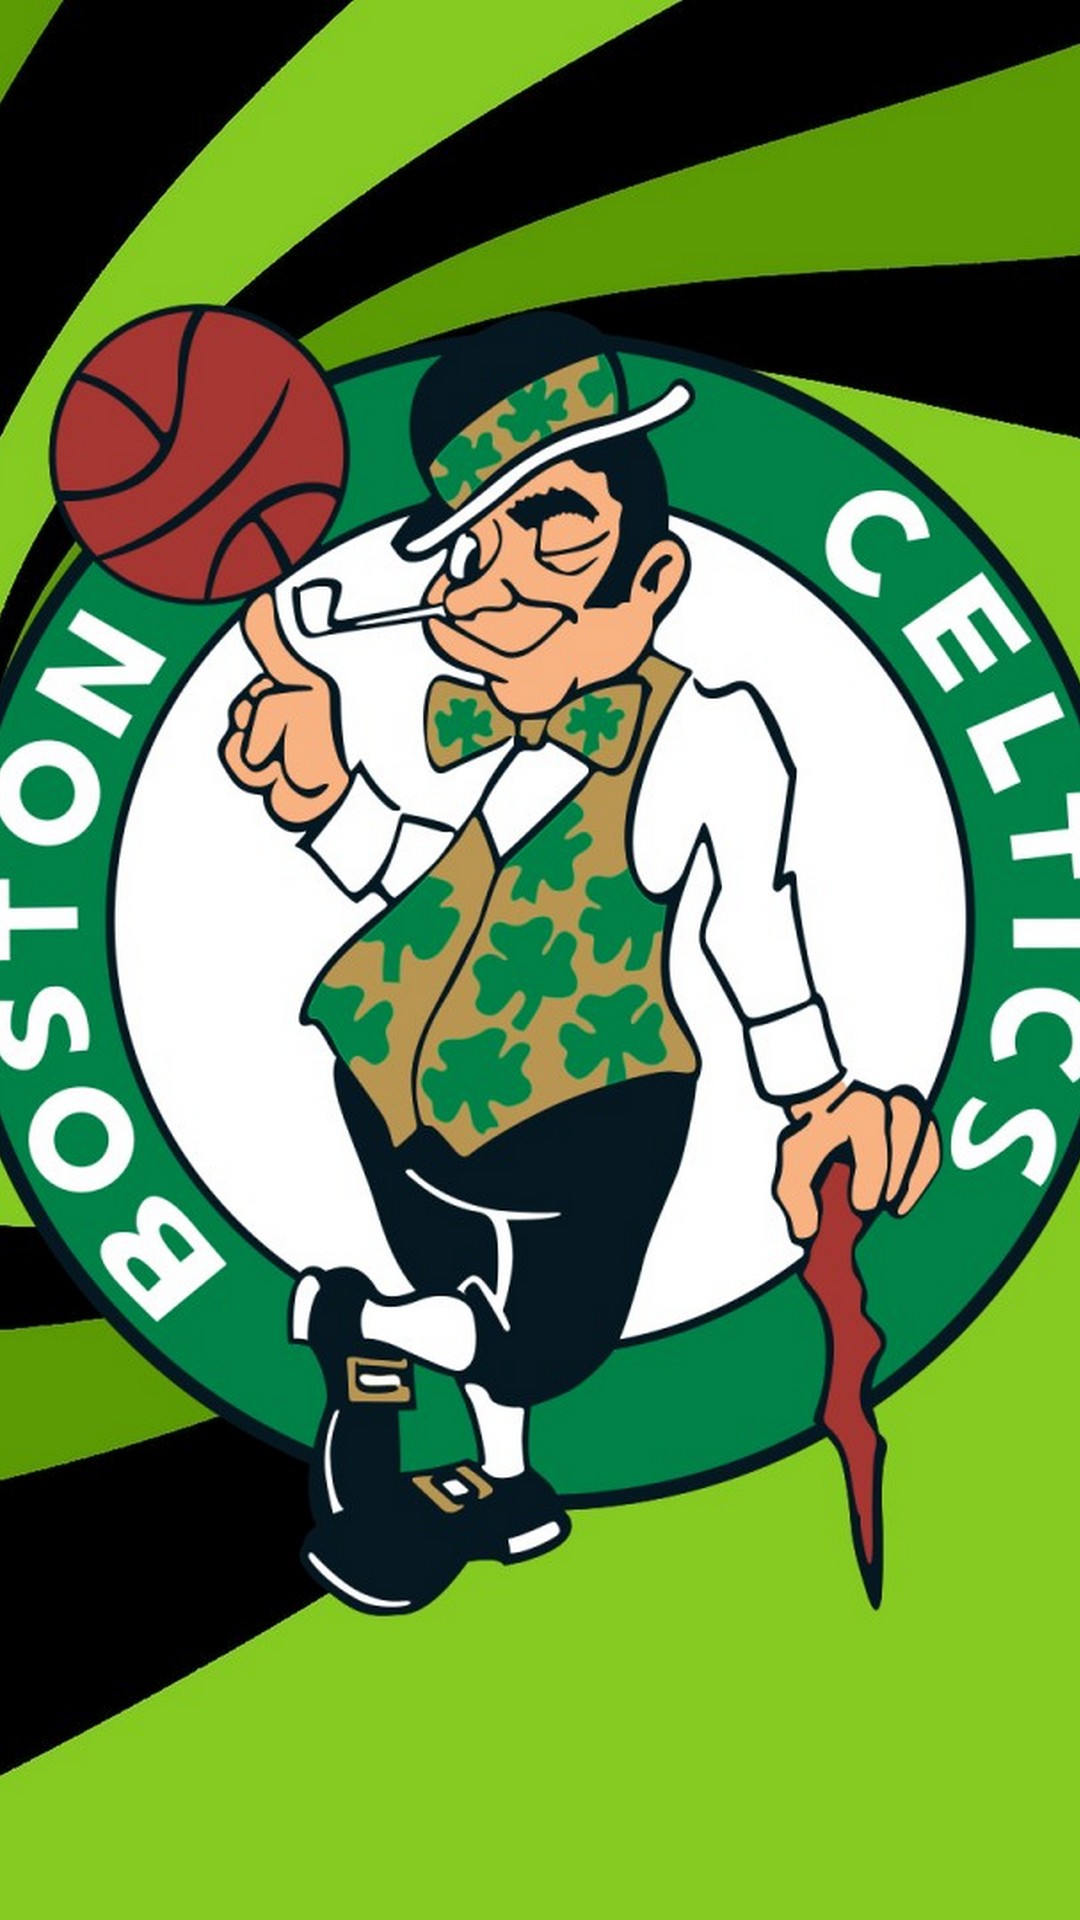 iPhone Wallpaper HD Boston Celtics With Resolution 1080X1920 pixel. You can make this wallpaper for your Desktop Computer Backgrounds, Mac Wallpapers, Android Lock screen or iPhone Screensavers